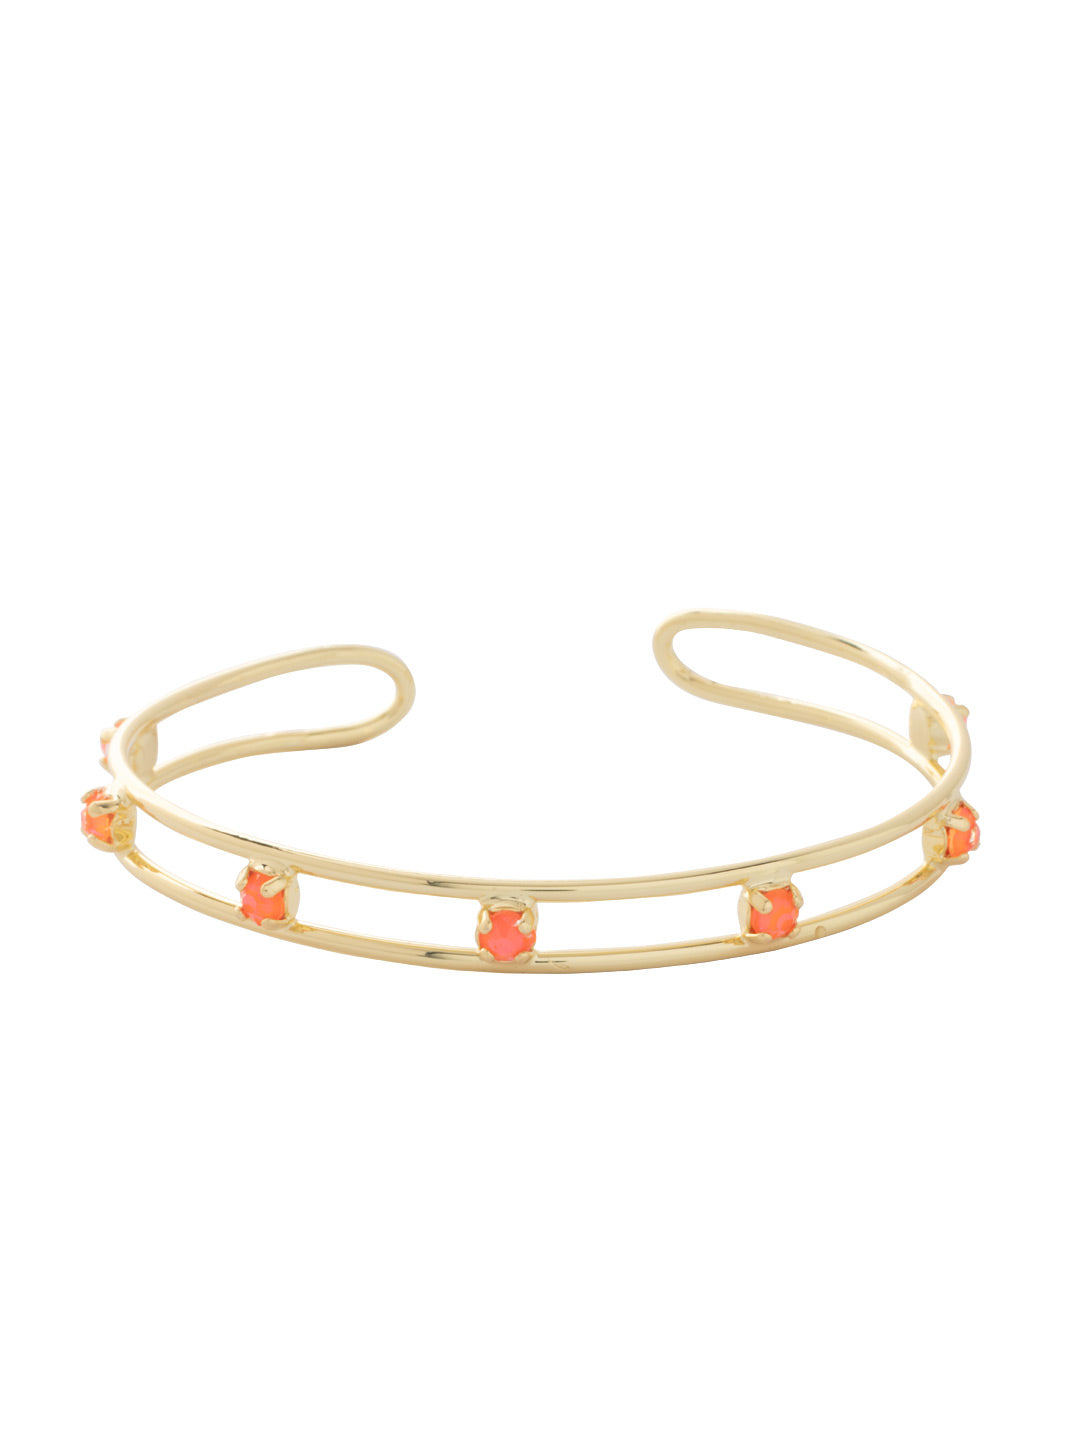 Aerie Cuff Bracelet - BFM6BGETO - <p>The Aerie Cuff Bracelet features an open adjustable cuff band studded with round cut crystals. From Sorrelli's Electric Orange collection in our Bright Gold-tone finish.</p>